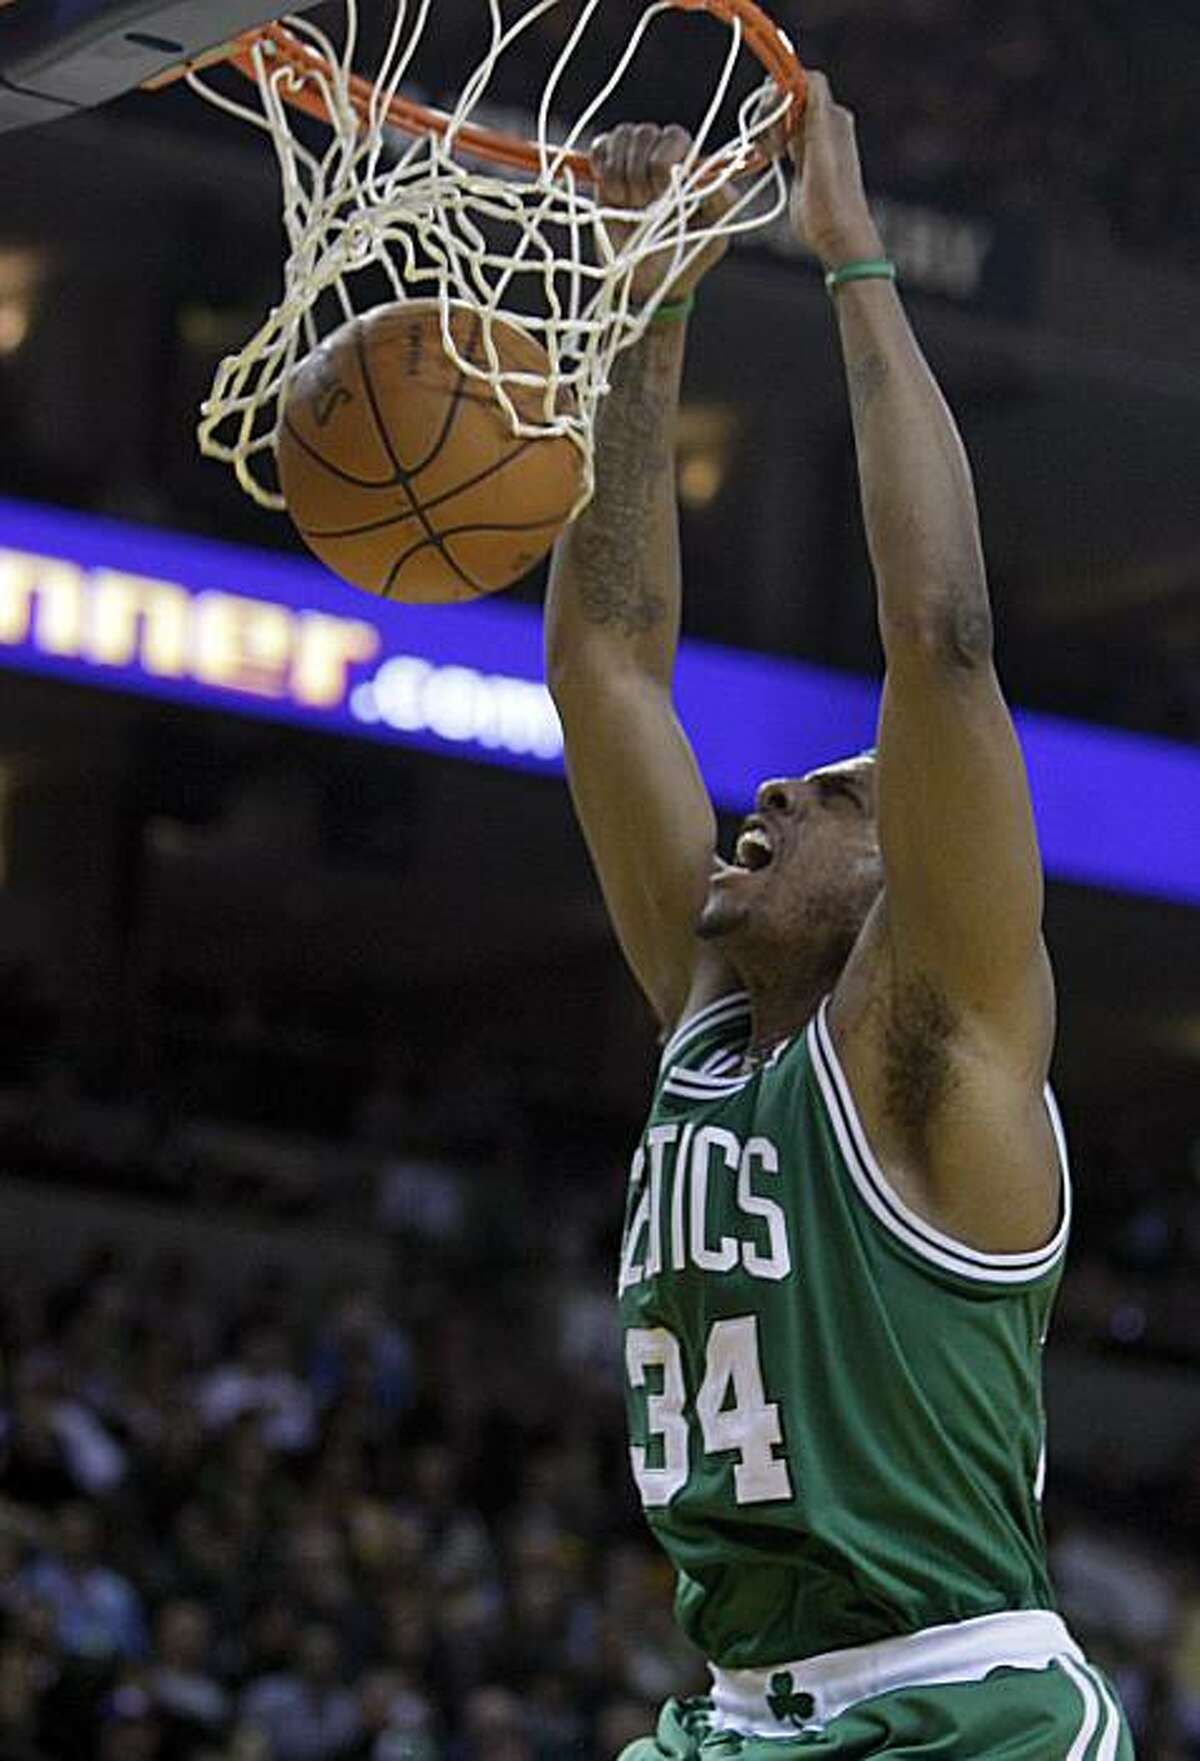 Boston Celtics' Paul Pierce scores against the Golden State Warriors during the second half of an NBA basketball game Tuesday, Feb. 22, 2011, in Oakland, Calif.